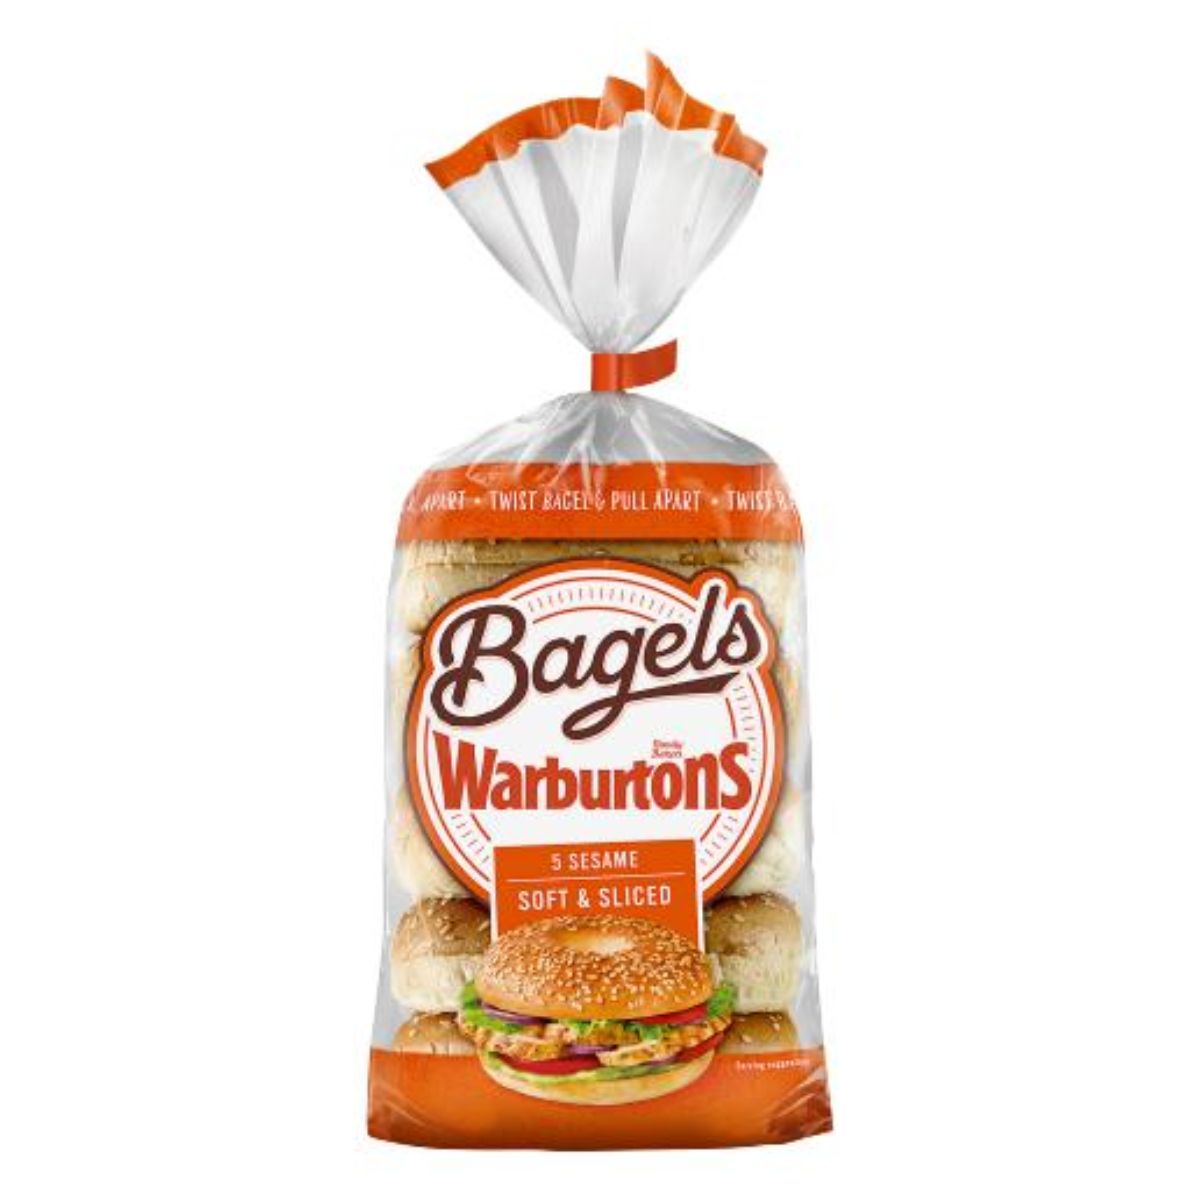 A bag of Warburtons - Sesame Bagels - 5pcs on a white background.